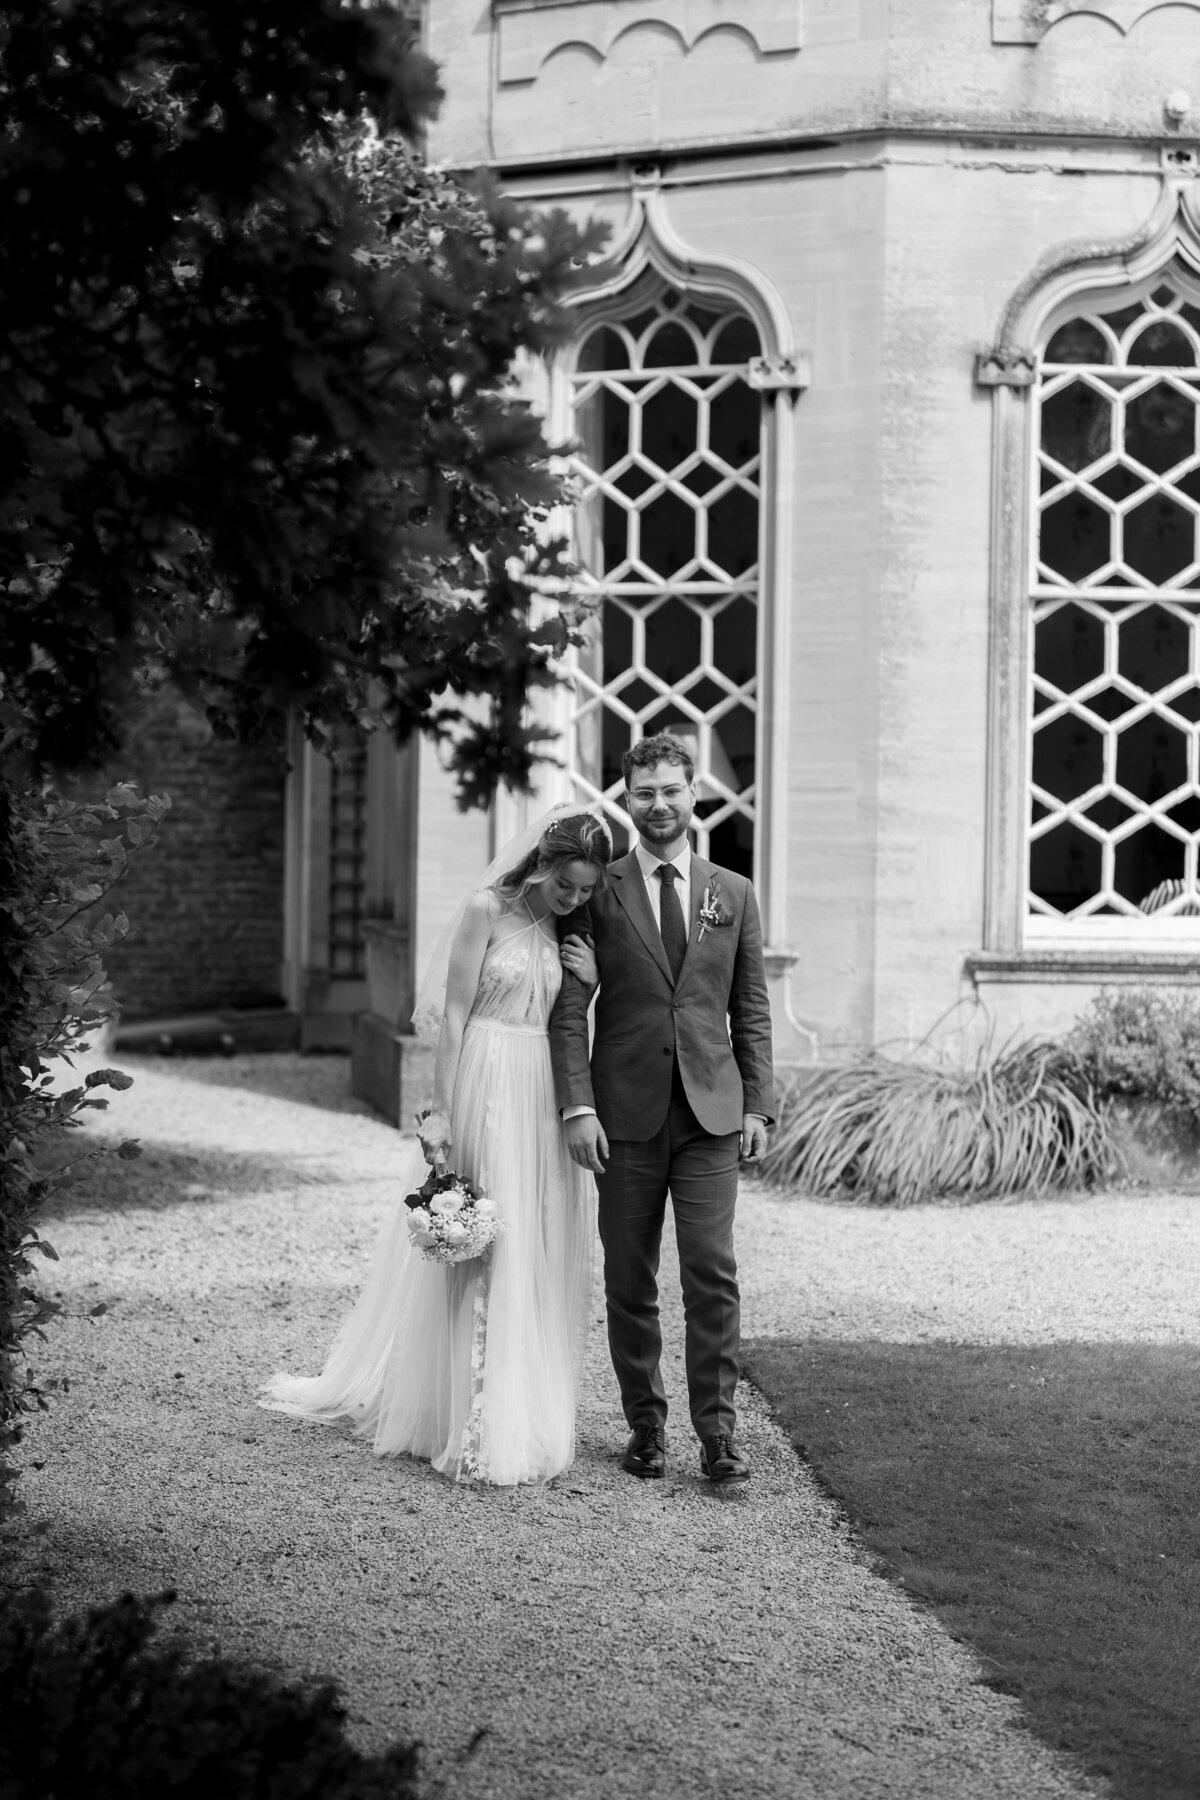 The bride and groom walk together at Frampton Court Estate, Gloucestershire